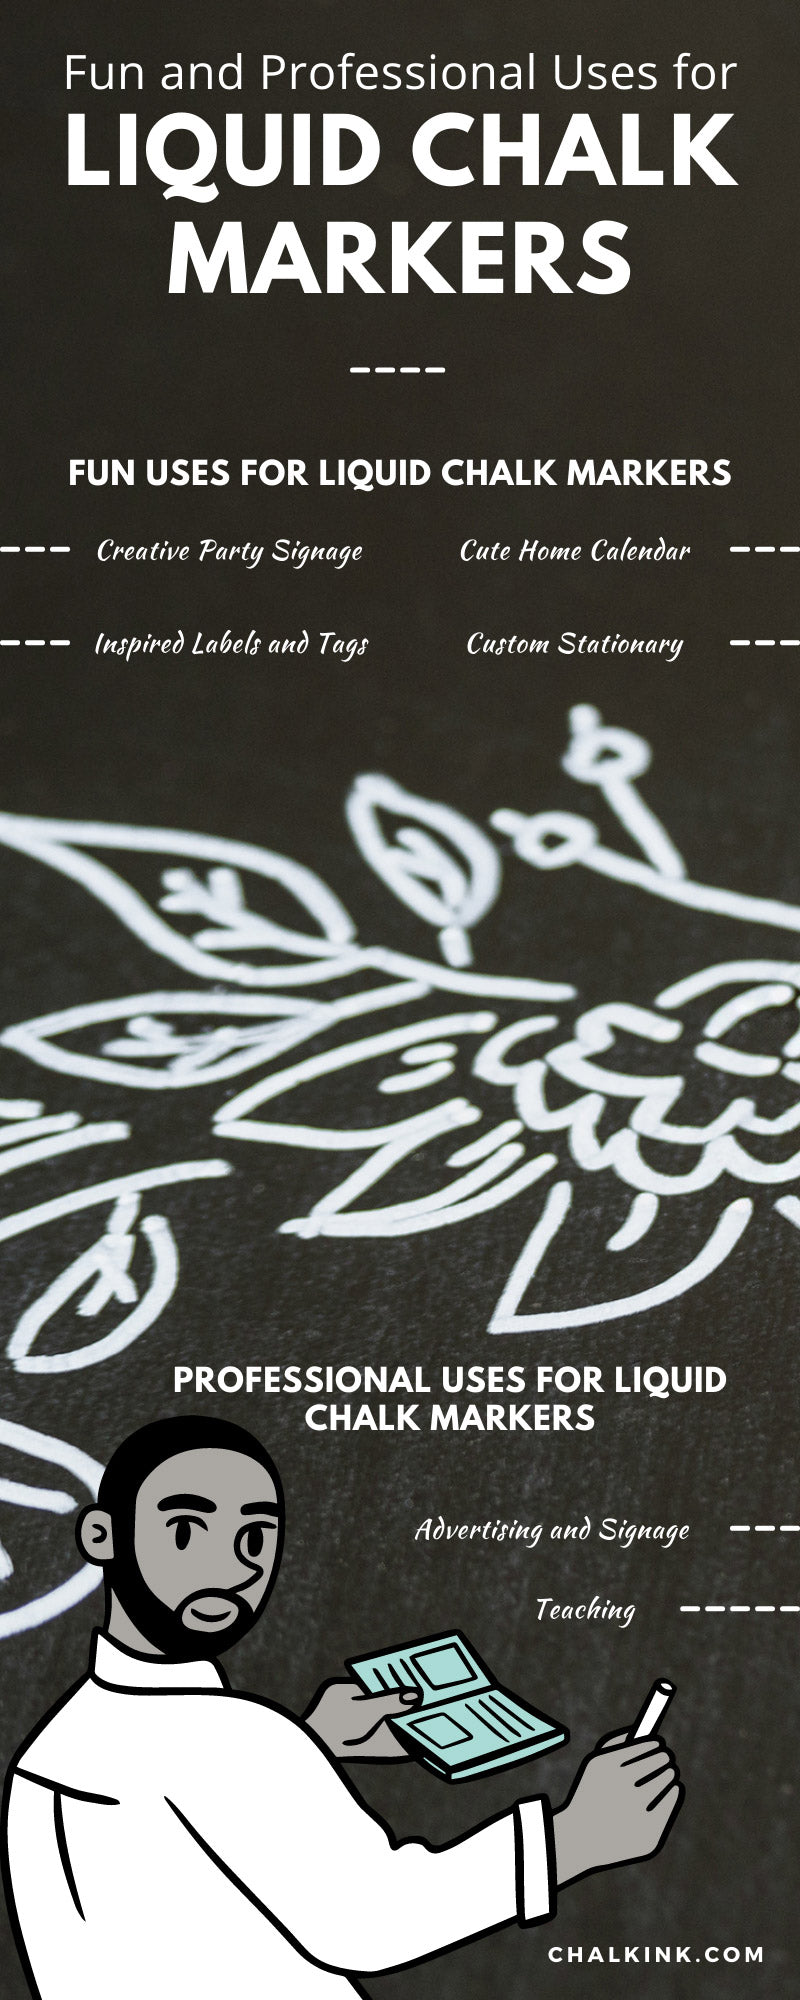 Fun and Professional Uses for Liquid Chalk Markers